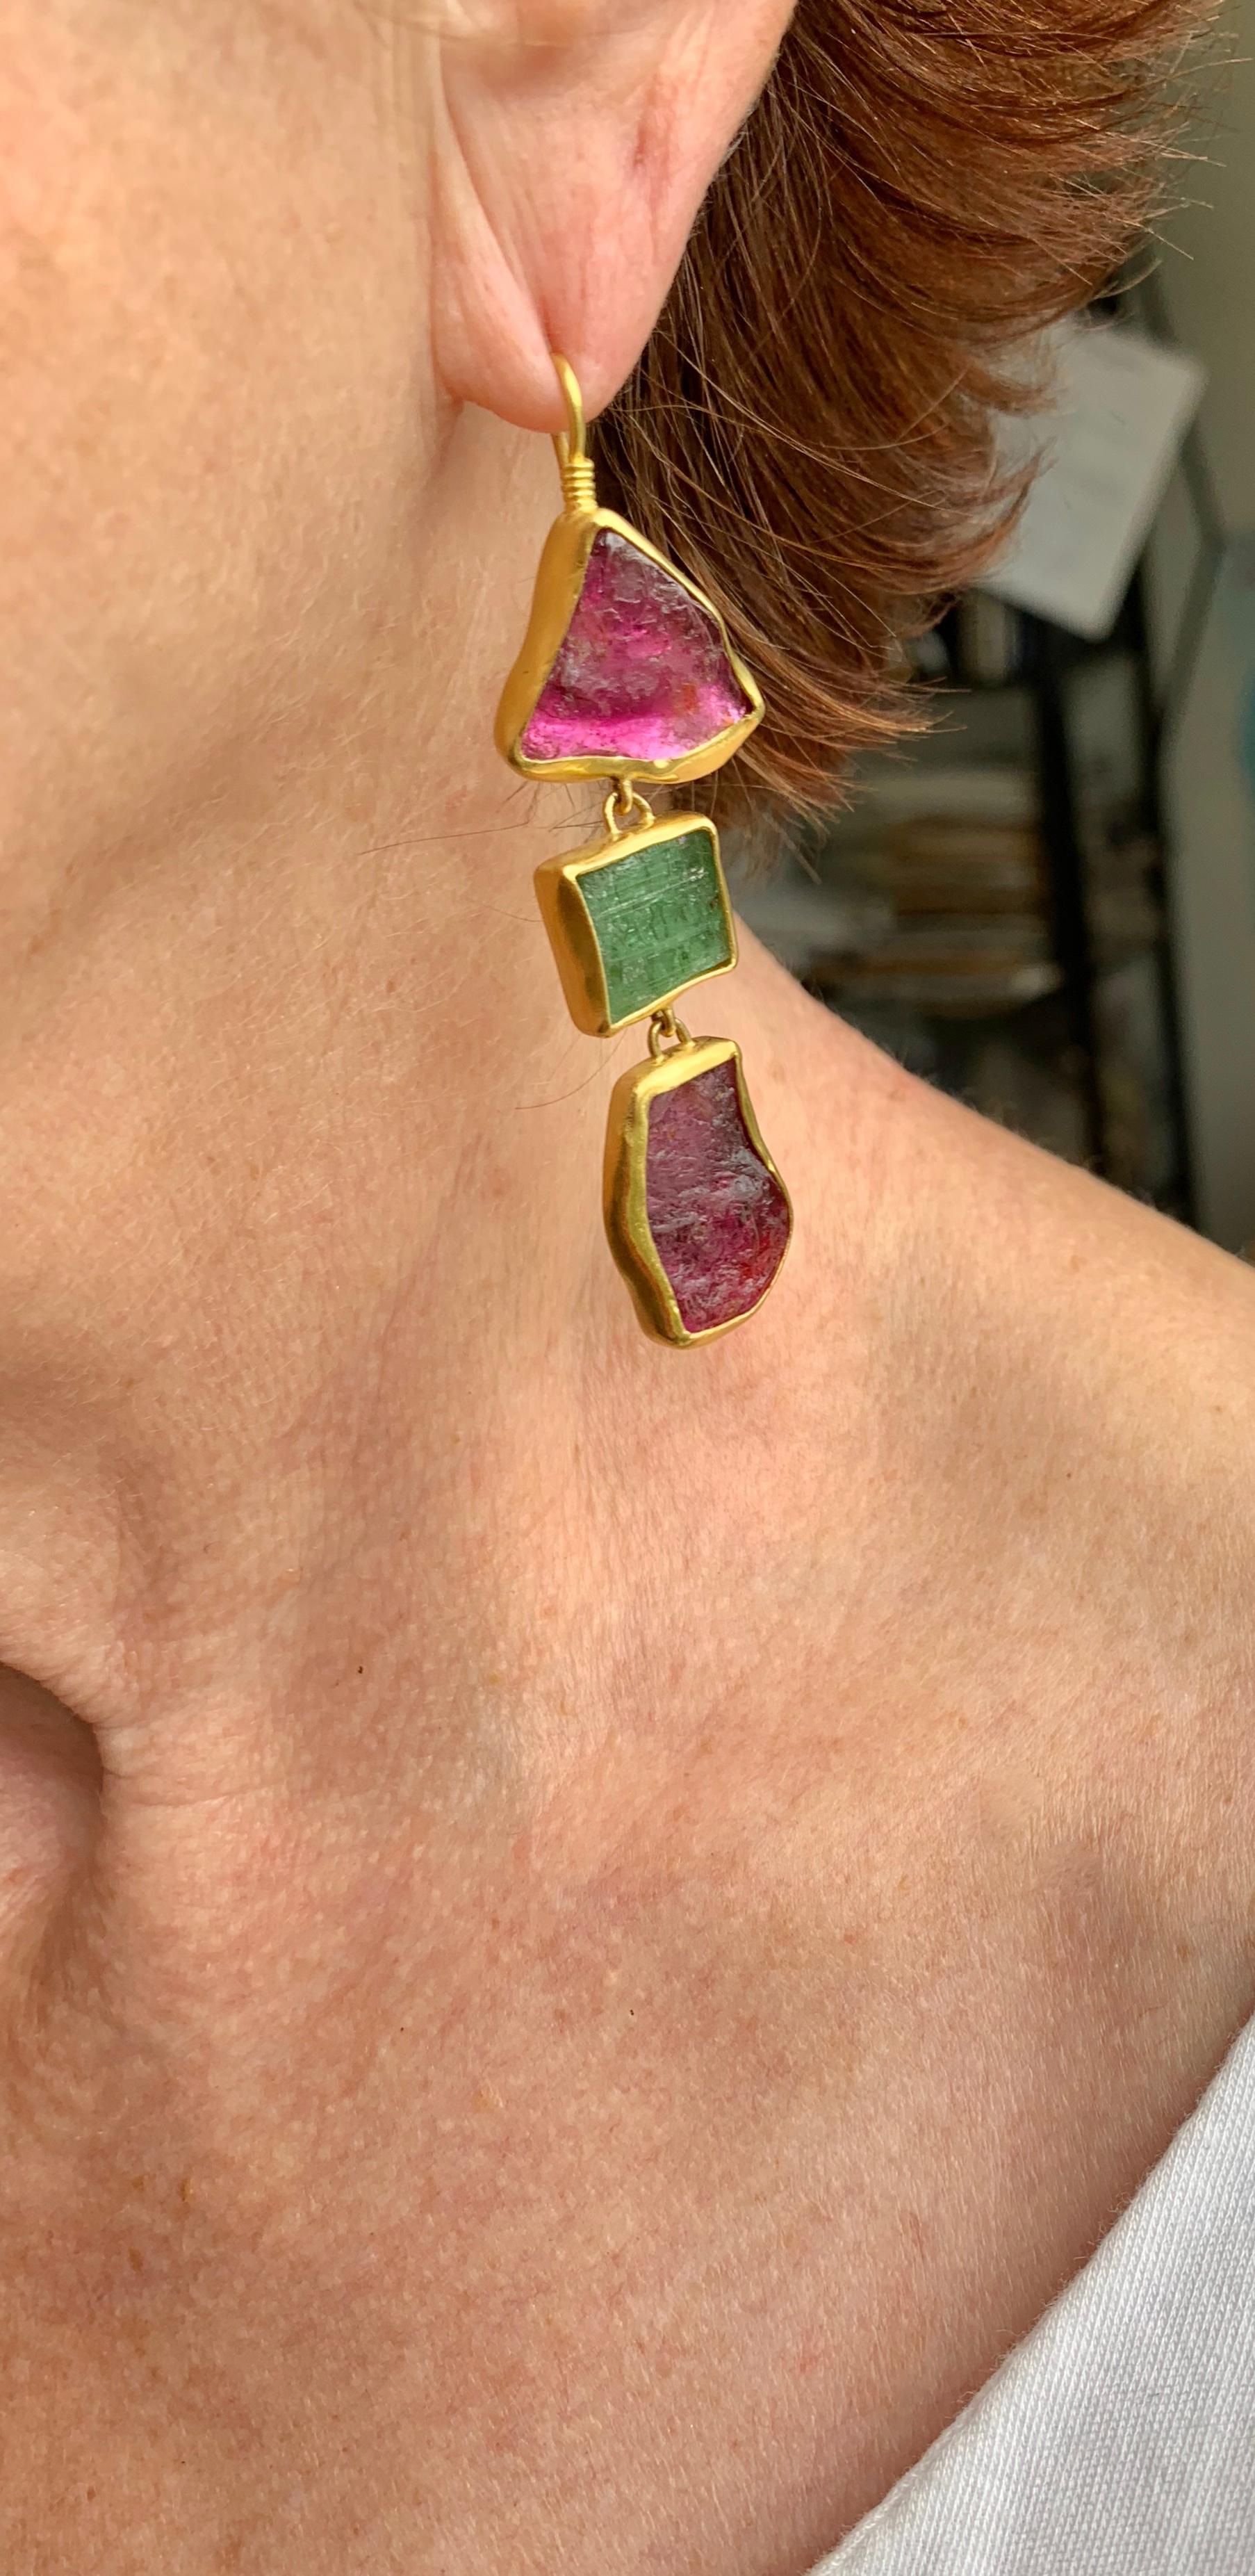 Arguably the most colorful of all gemstones, these tourmalines certainly do not disappoint. Free form pink and green tourmalines weighing 46.70 carats, have been delicately set in a 22 karat gold organic shaped bezel, 20 karat gold ear wire.